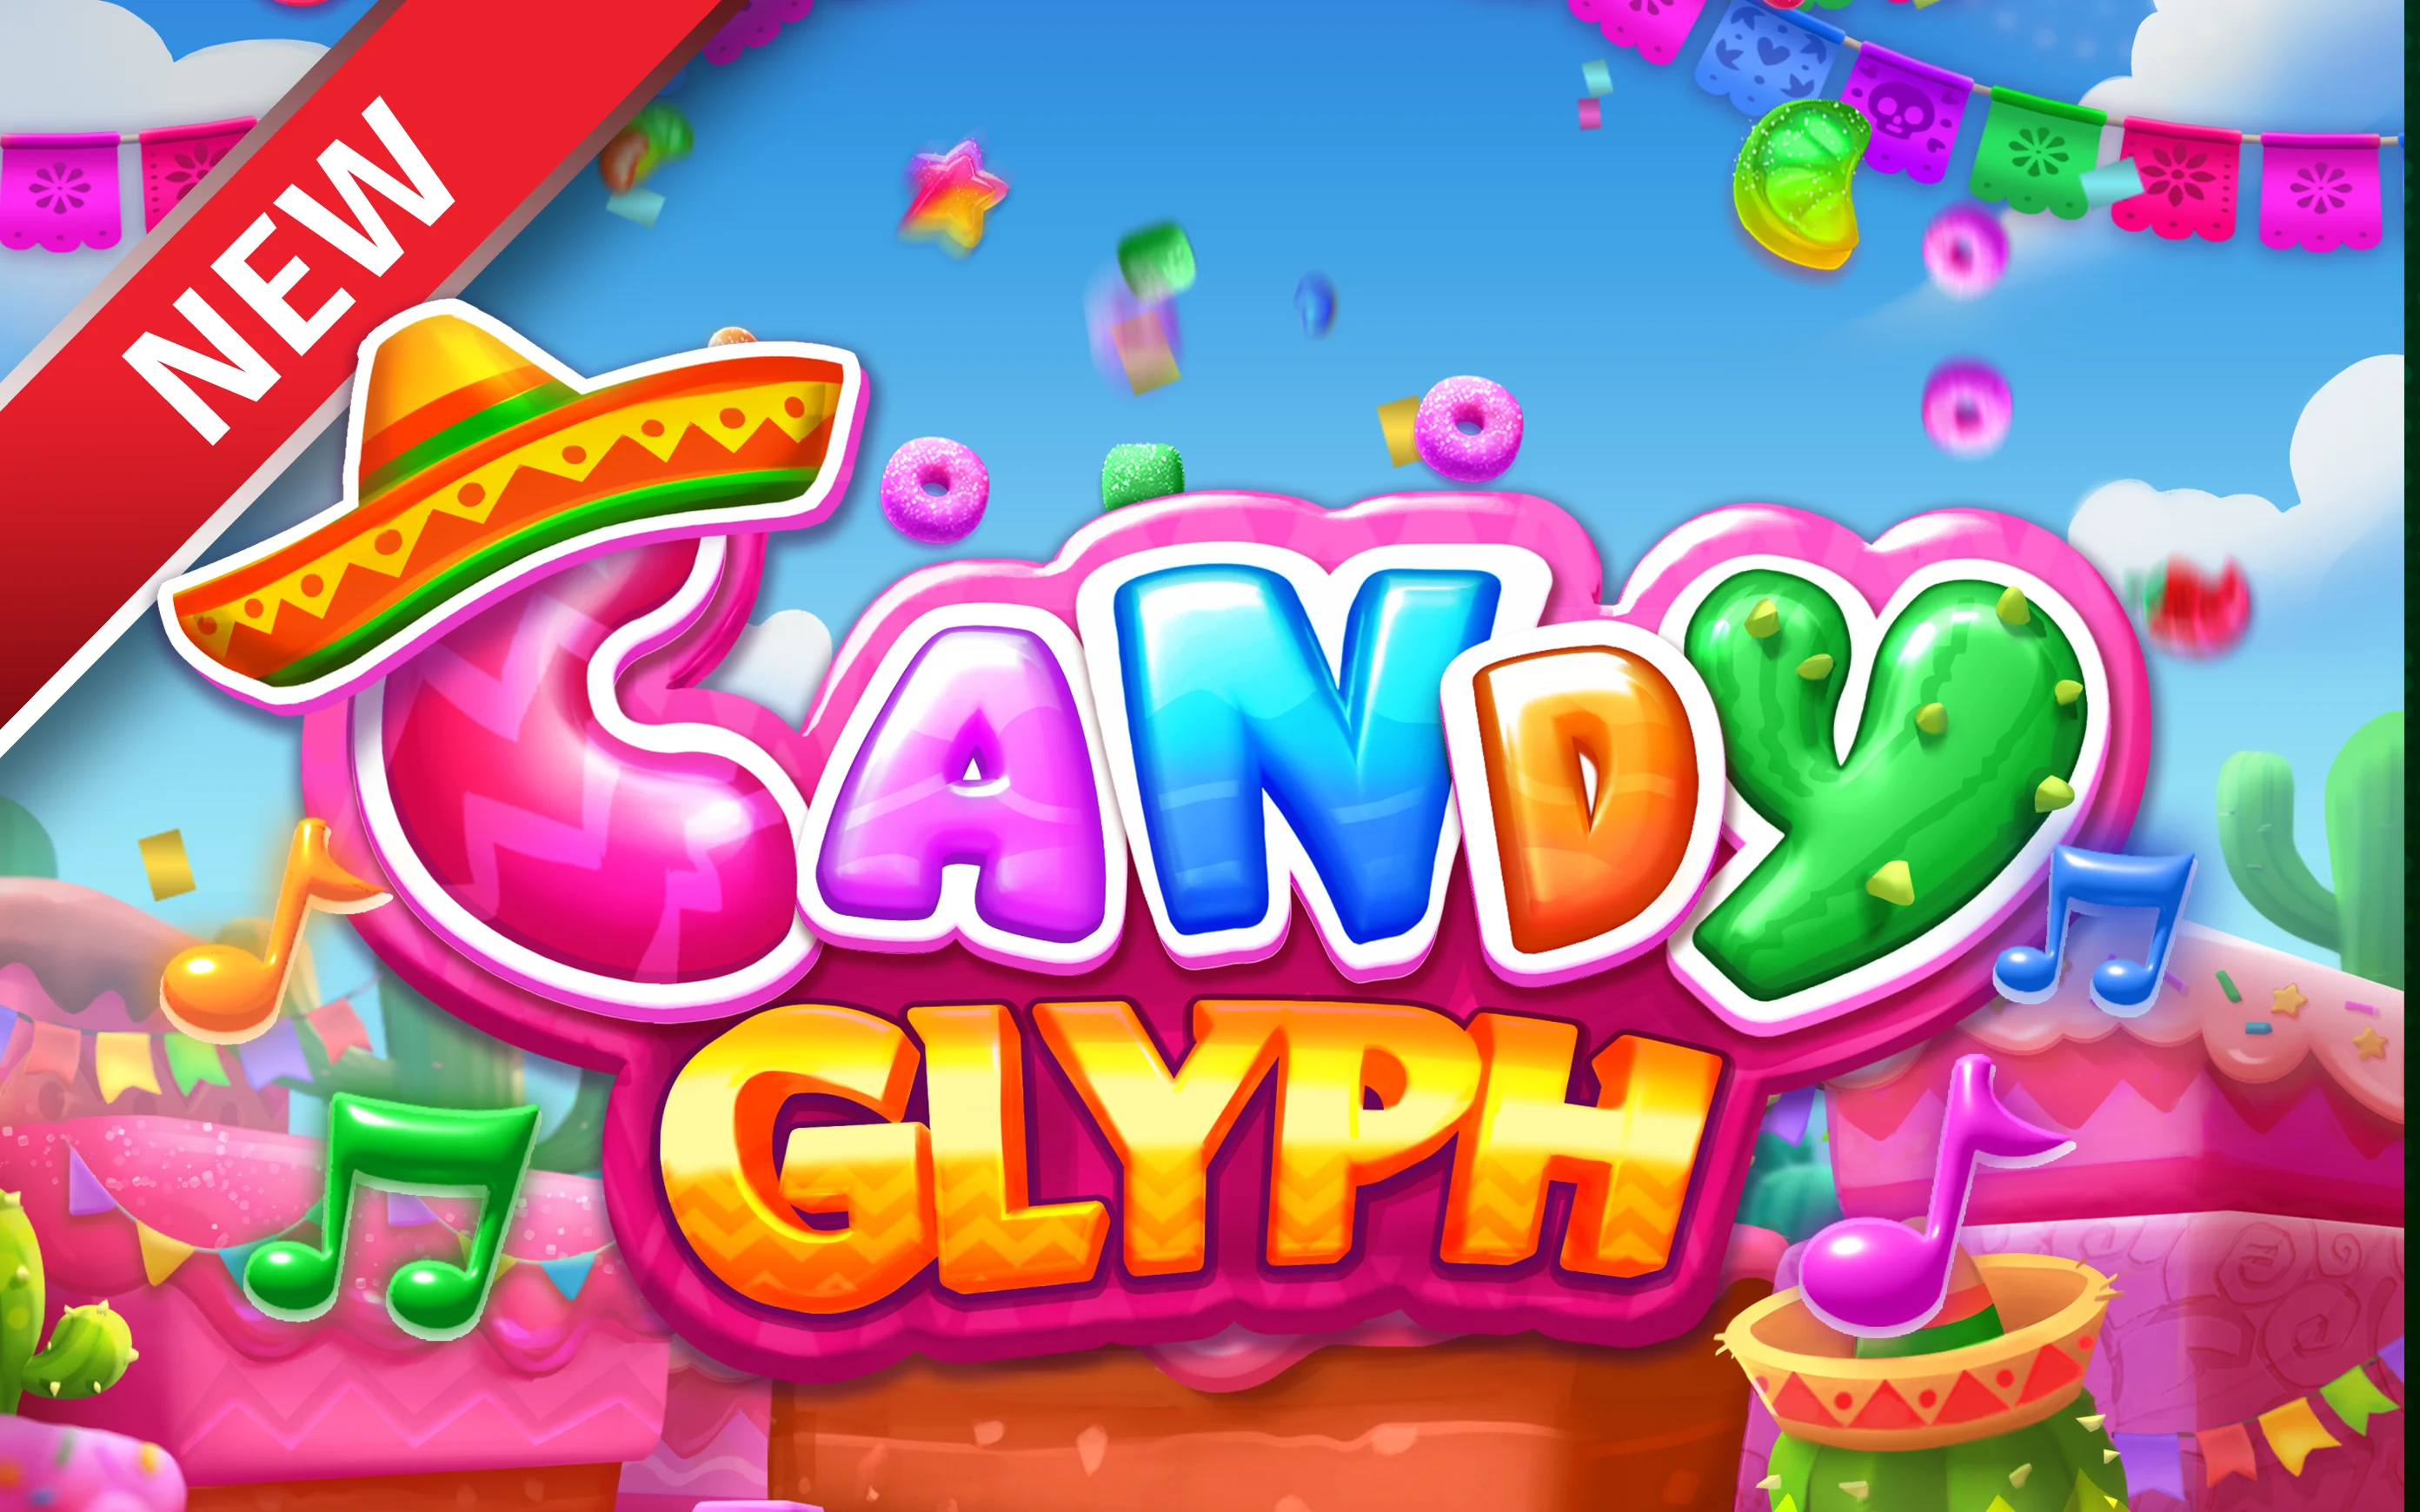 Play Candy Glyph on Starcasino.be online casino